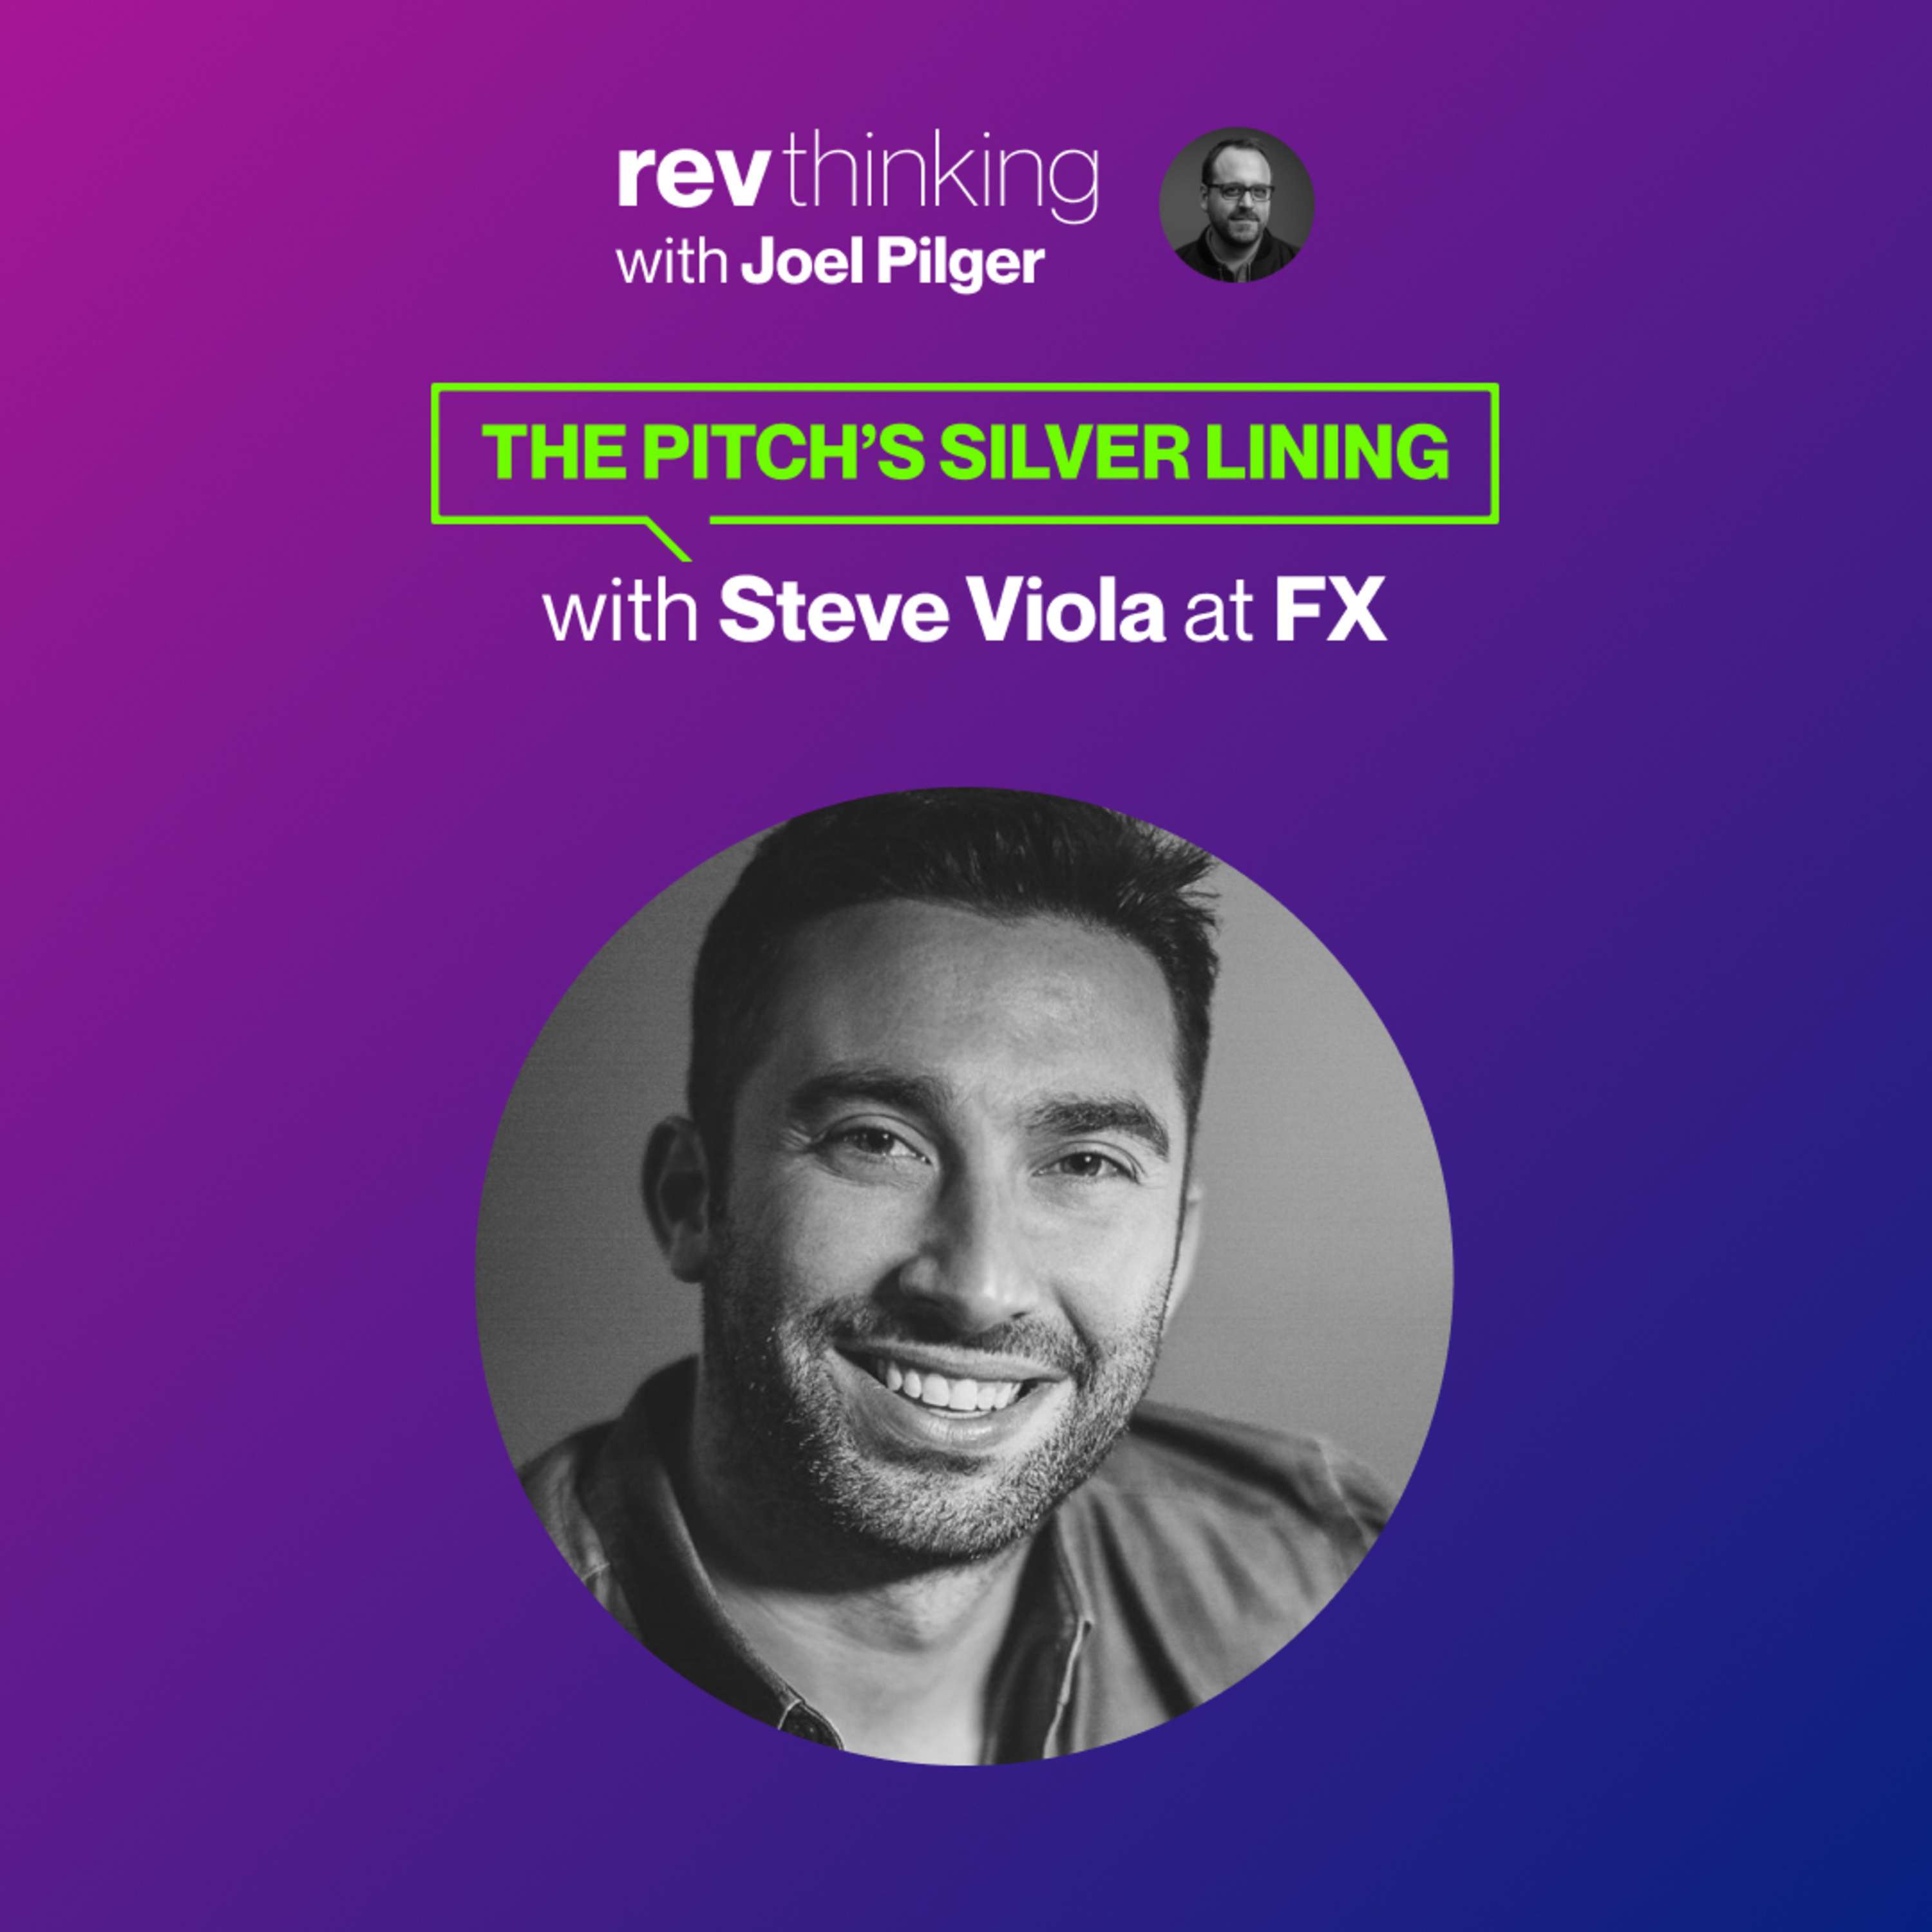 The Pitch's Silver Lining with Steve Viola at FX